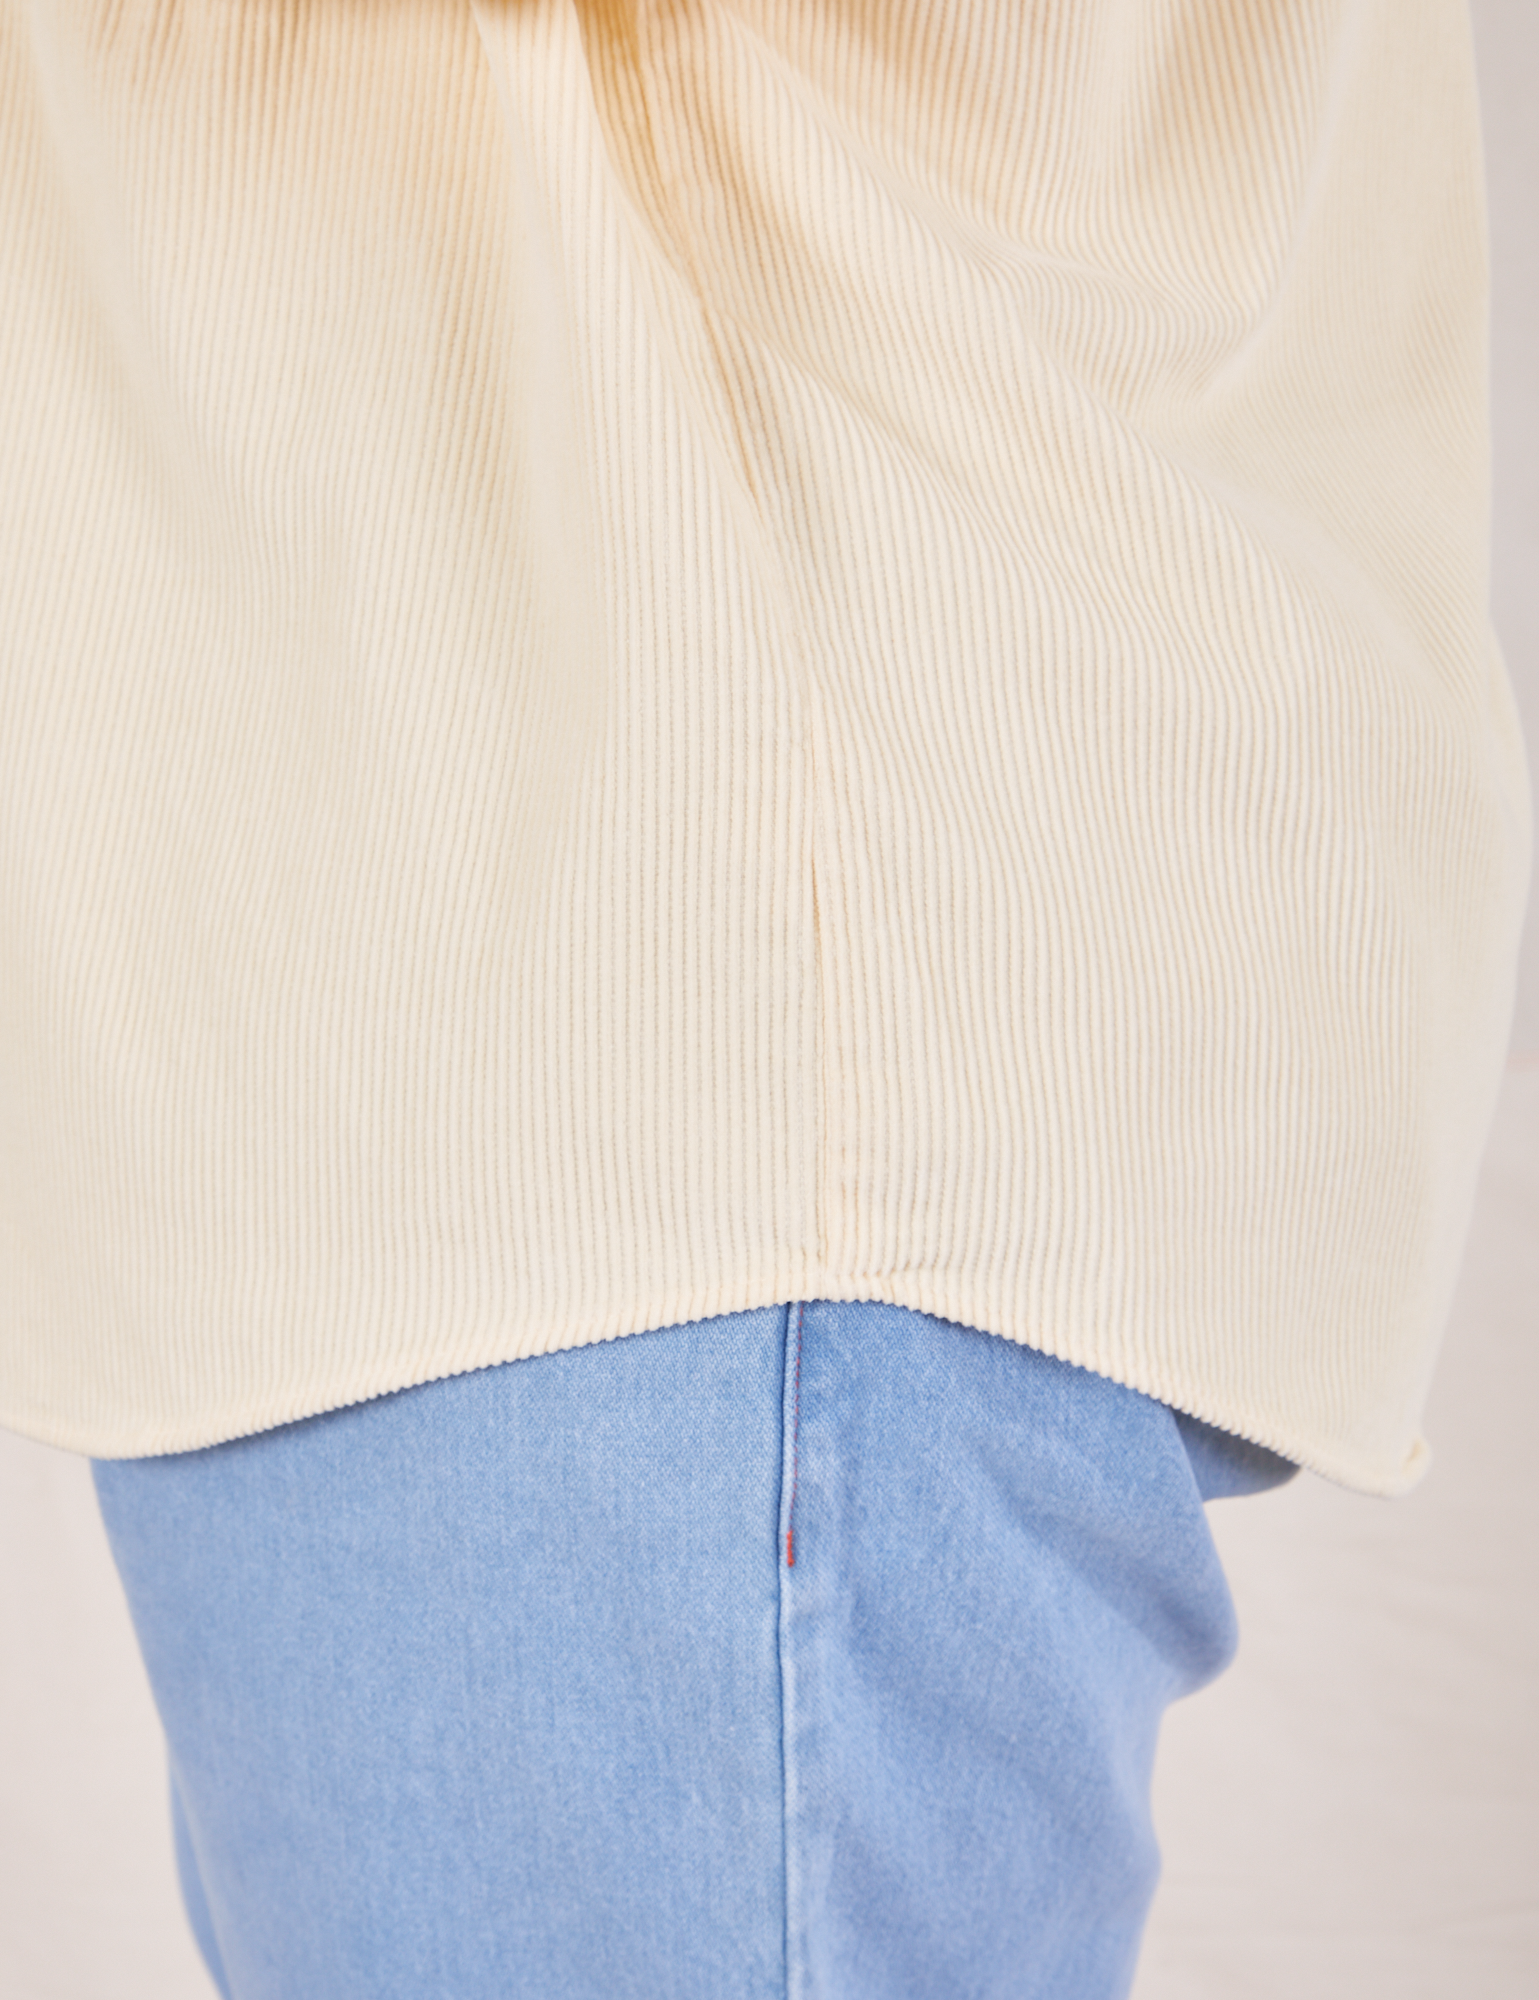 Corduroy Overshirt in Vintage Off-White side close up